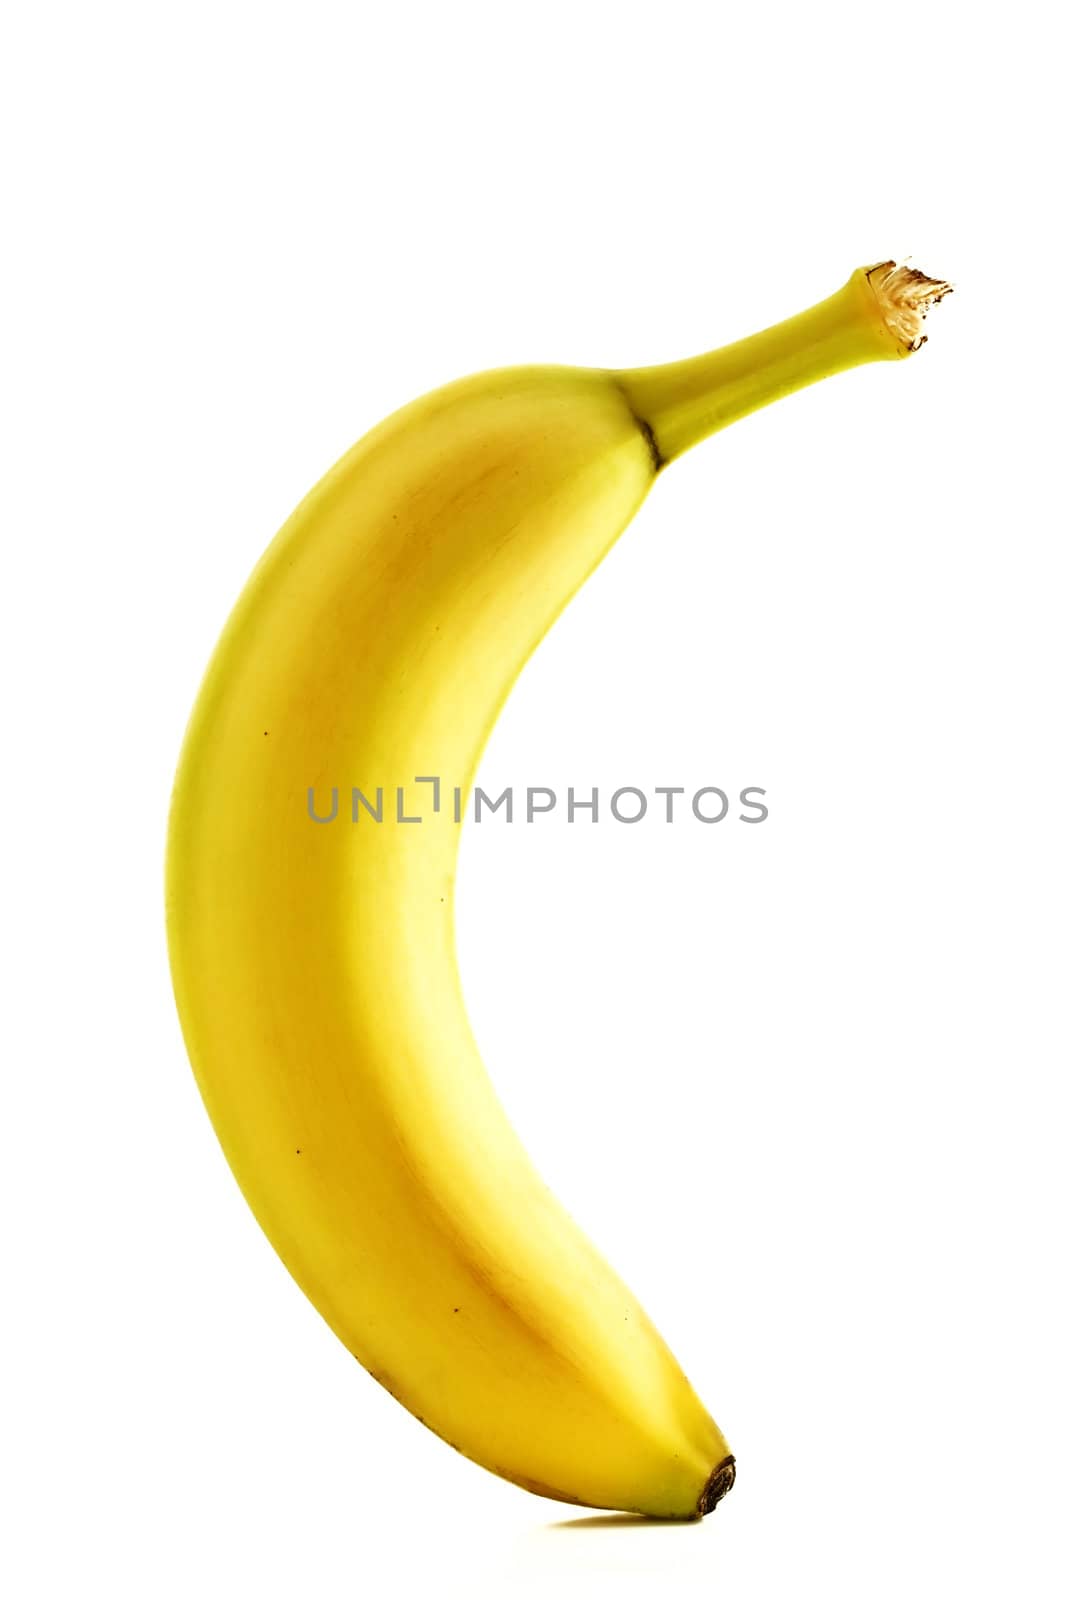 one banana standing on white background